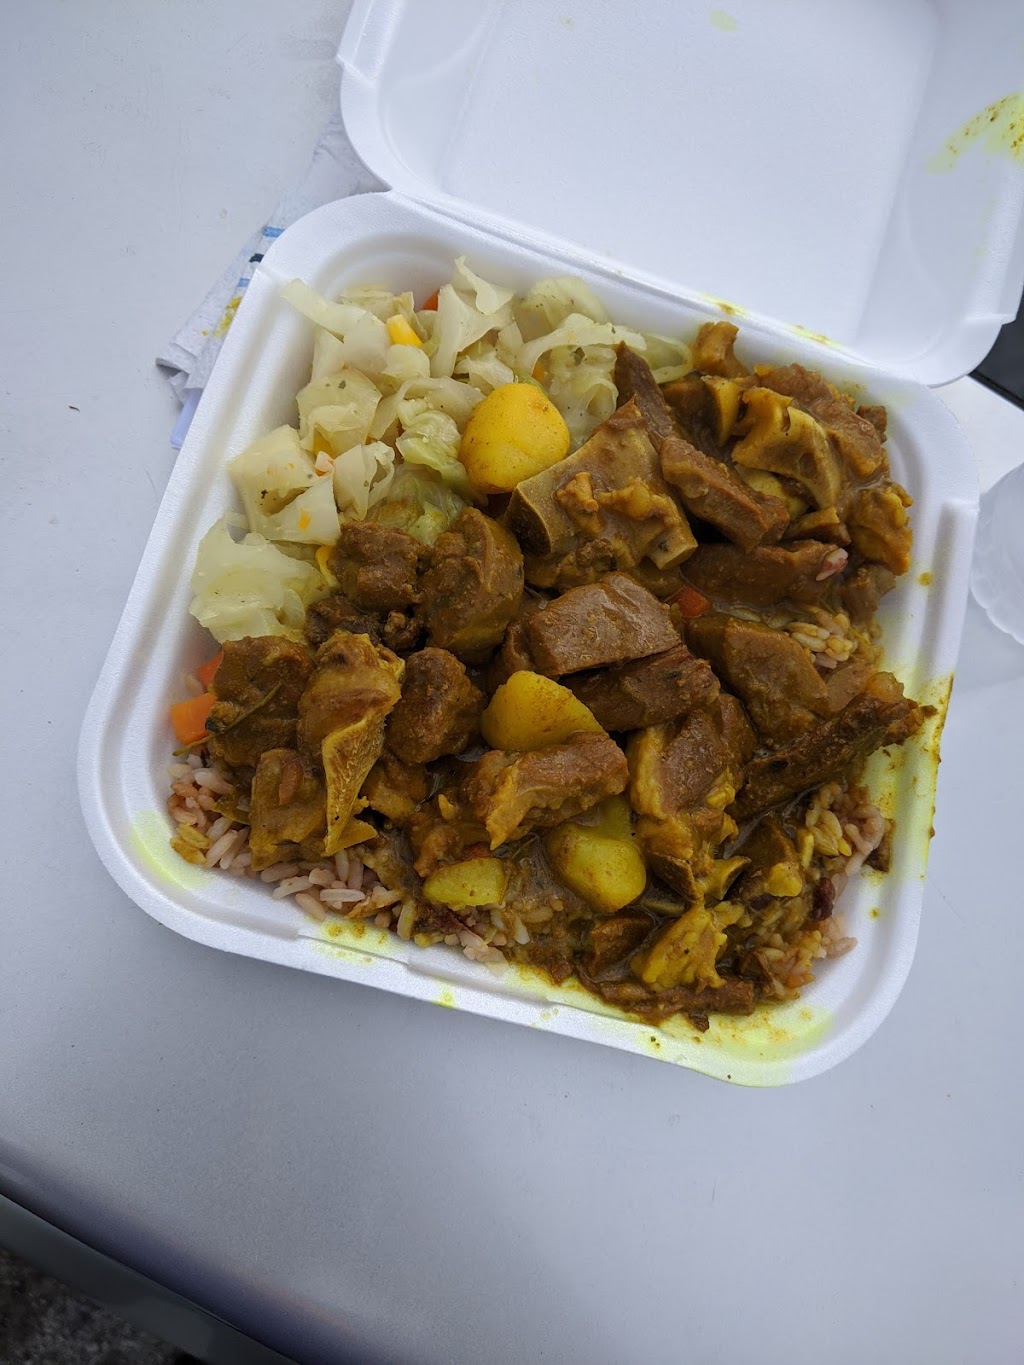 Best For Less Jamaican Jerk | 11618 N 22nd St, Tampa, FL 33612, USA | Phone: (813) 972-0200